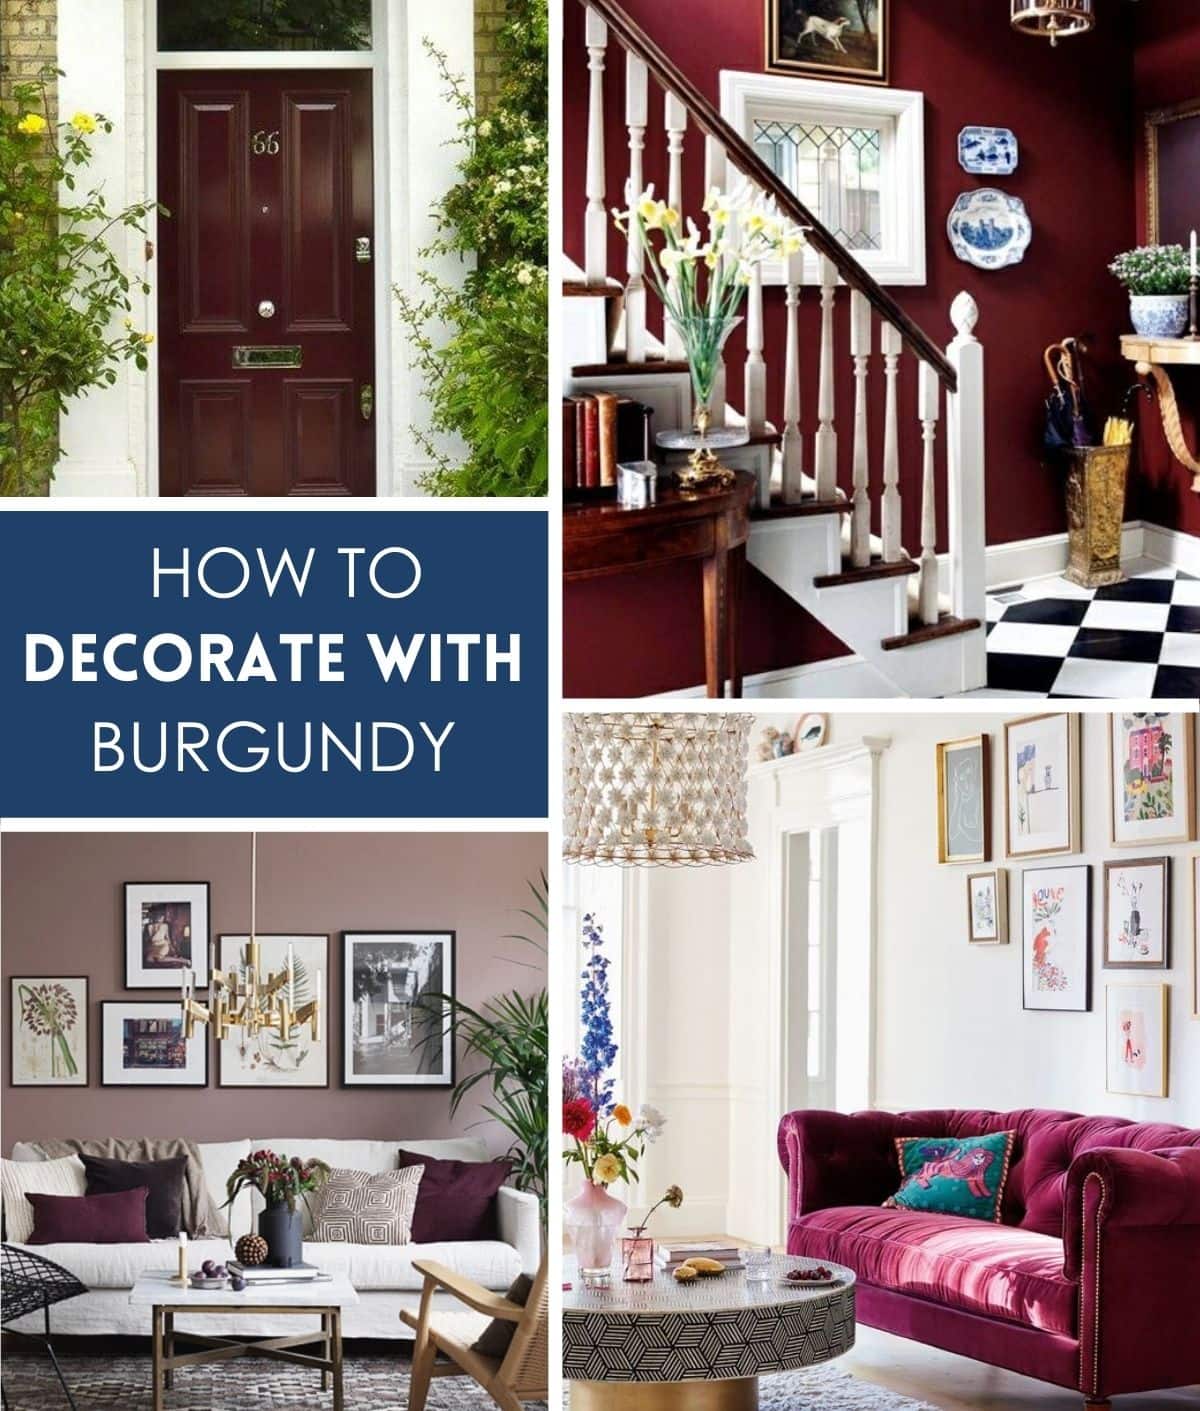 various spaces decorated using a burgundy shade.